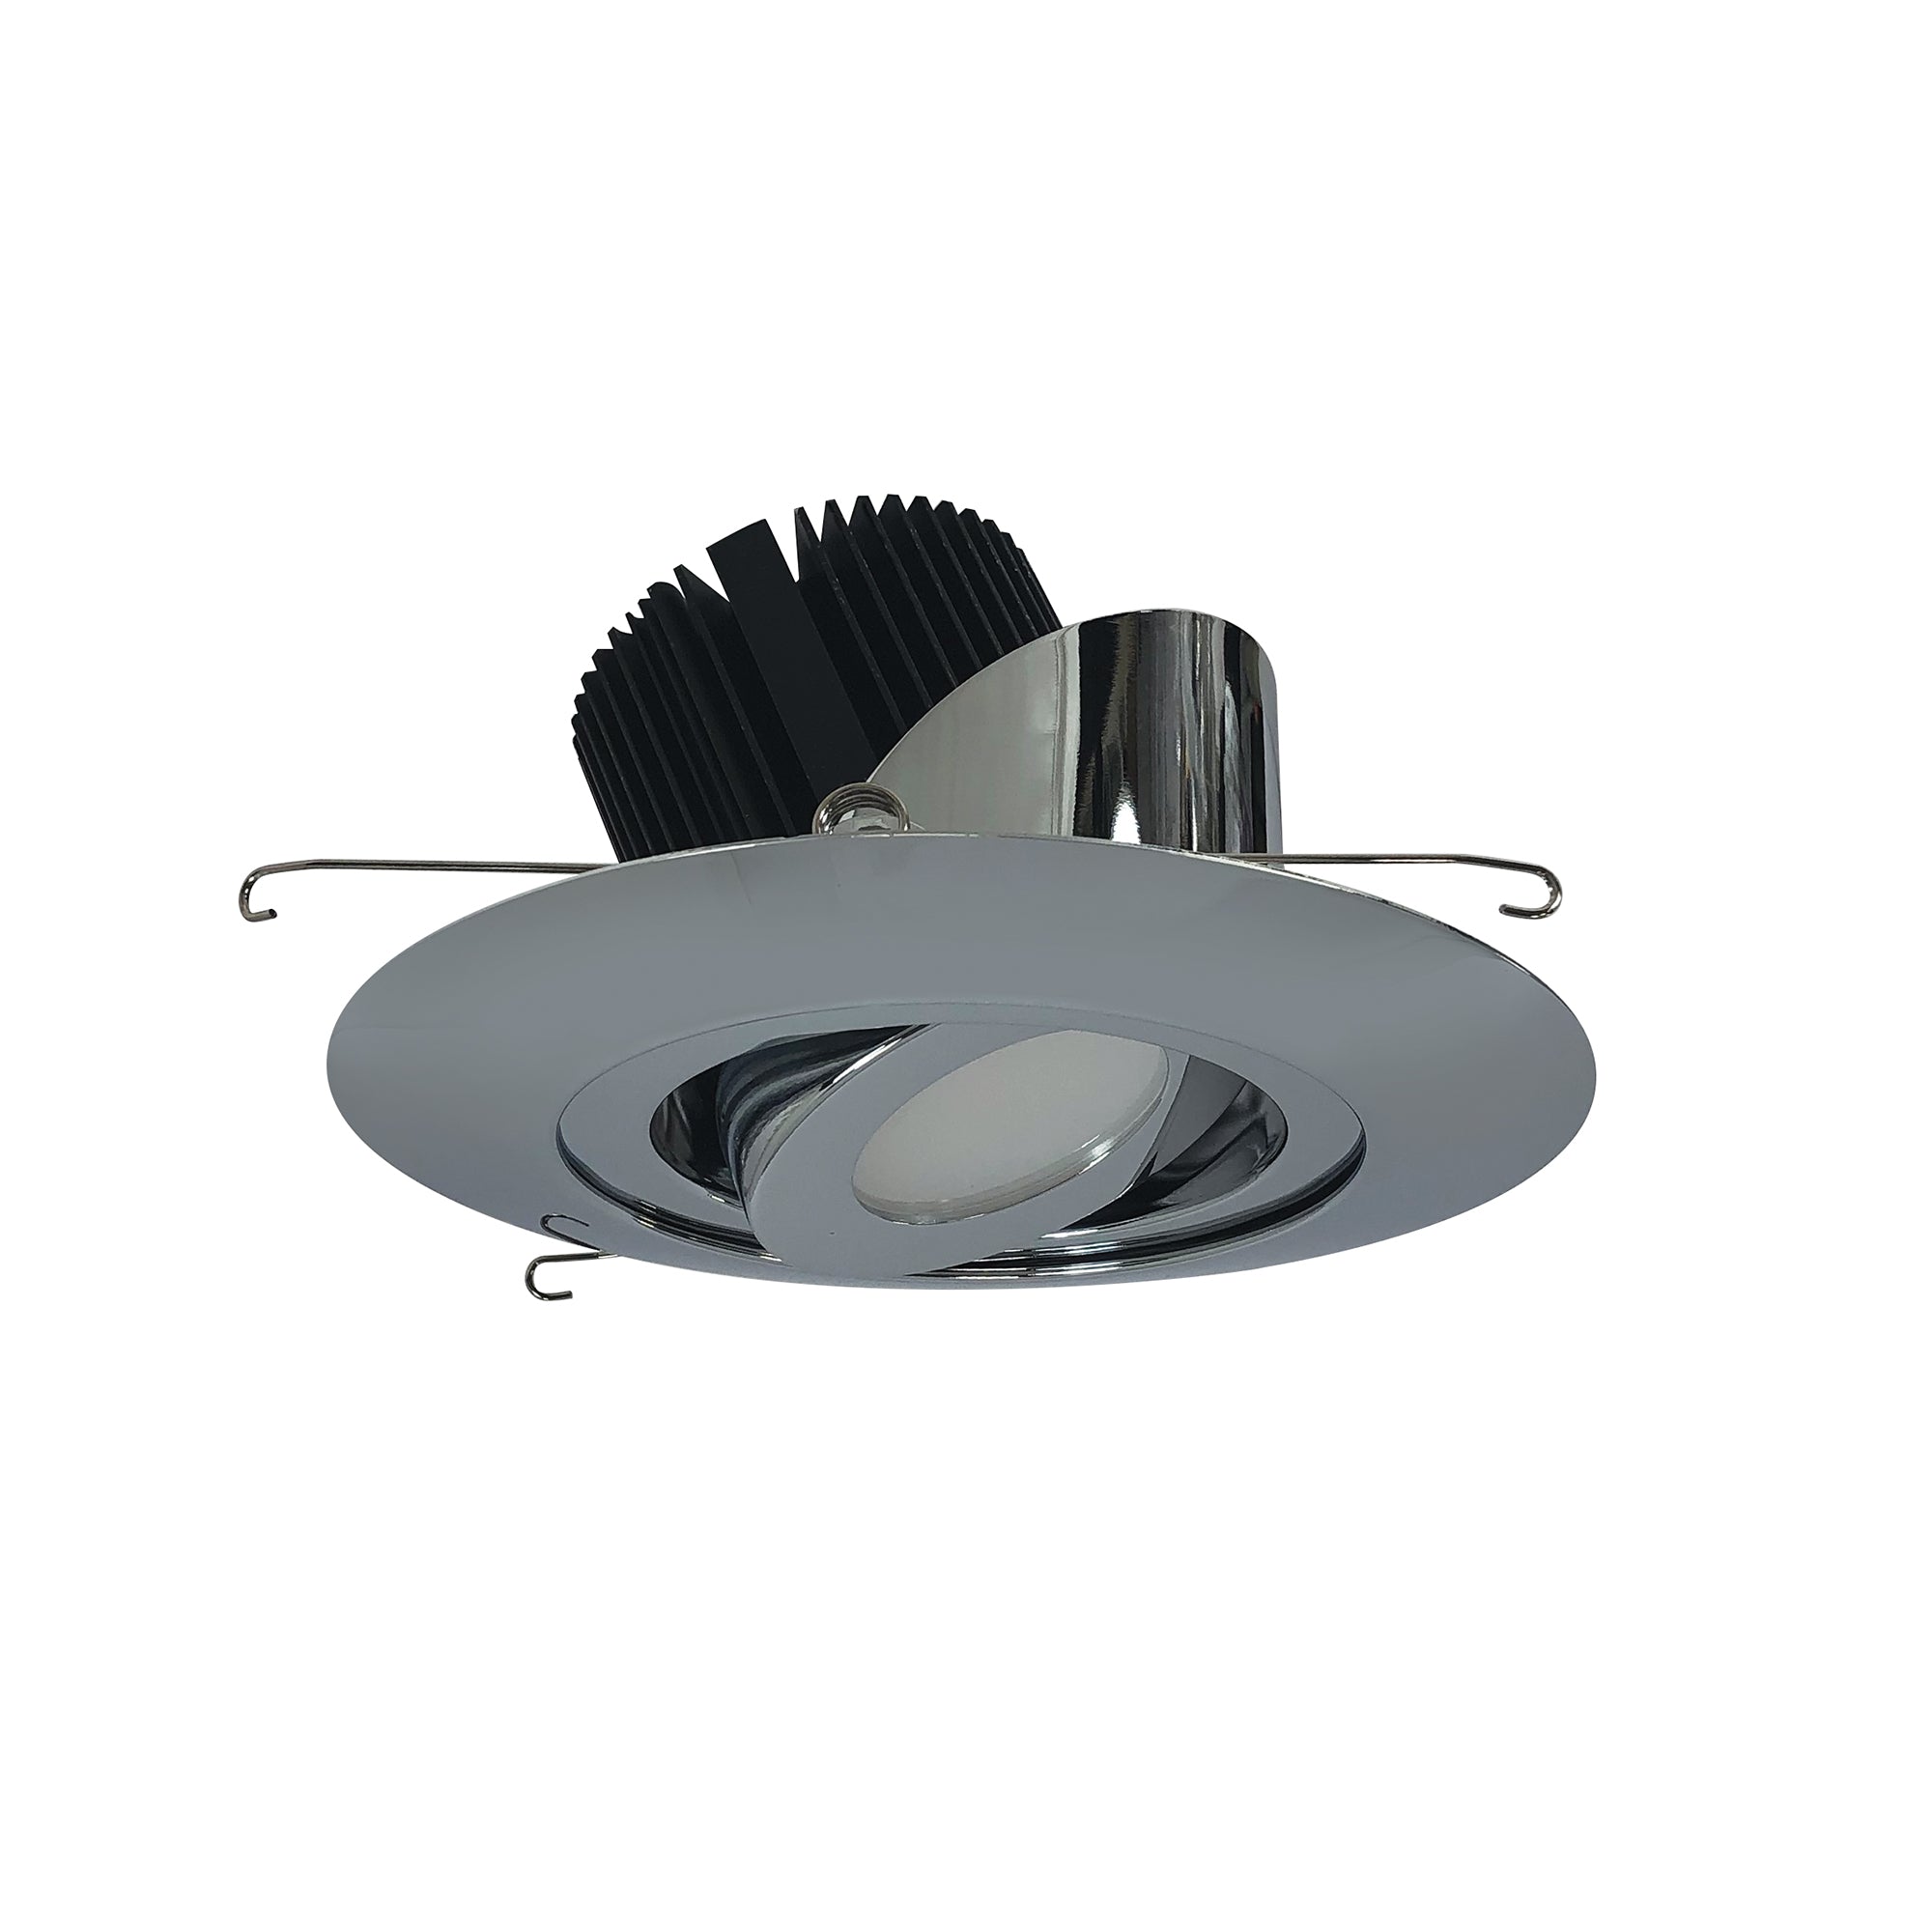 Nora Lighting NRM2-614L2540FC - Recessed - 6 Inch Marquise II Round Surface Adjustable Trim, Flood, 2500lm, 4000K, Chrome (Not Compatible with NHRM2-625 Housings)